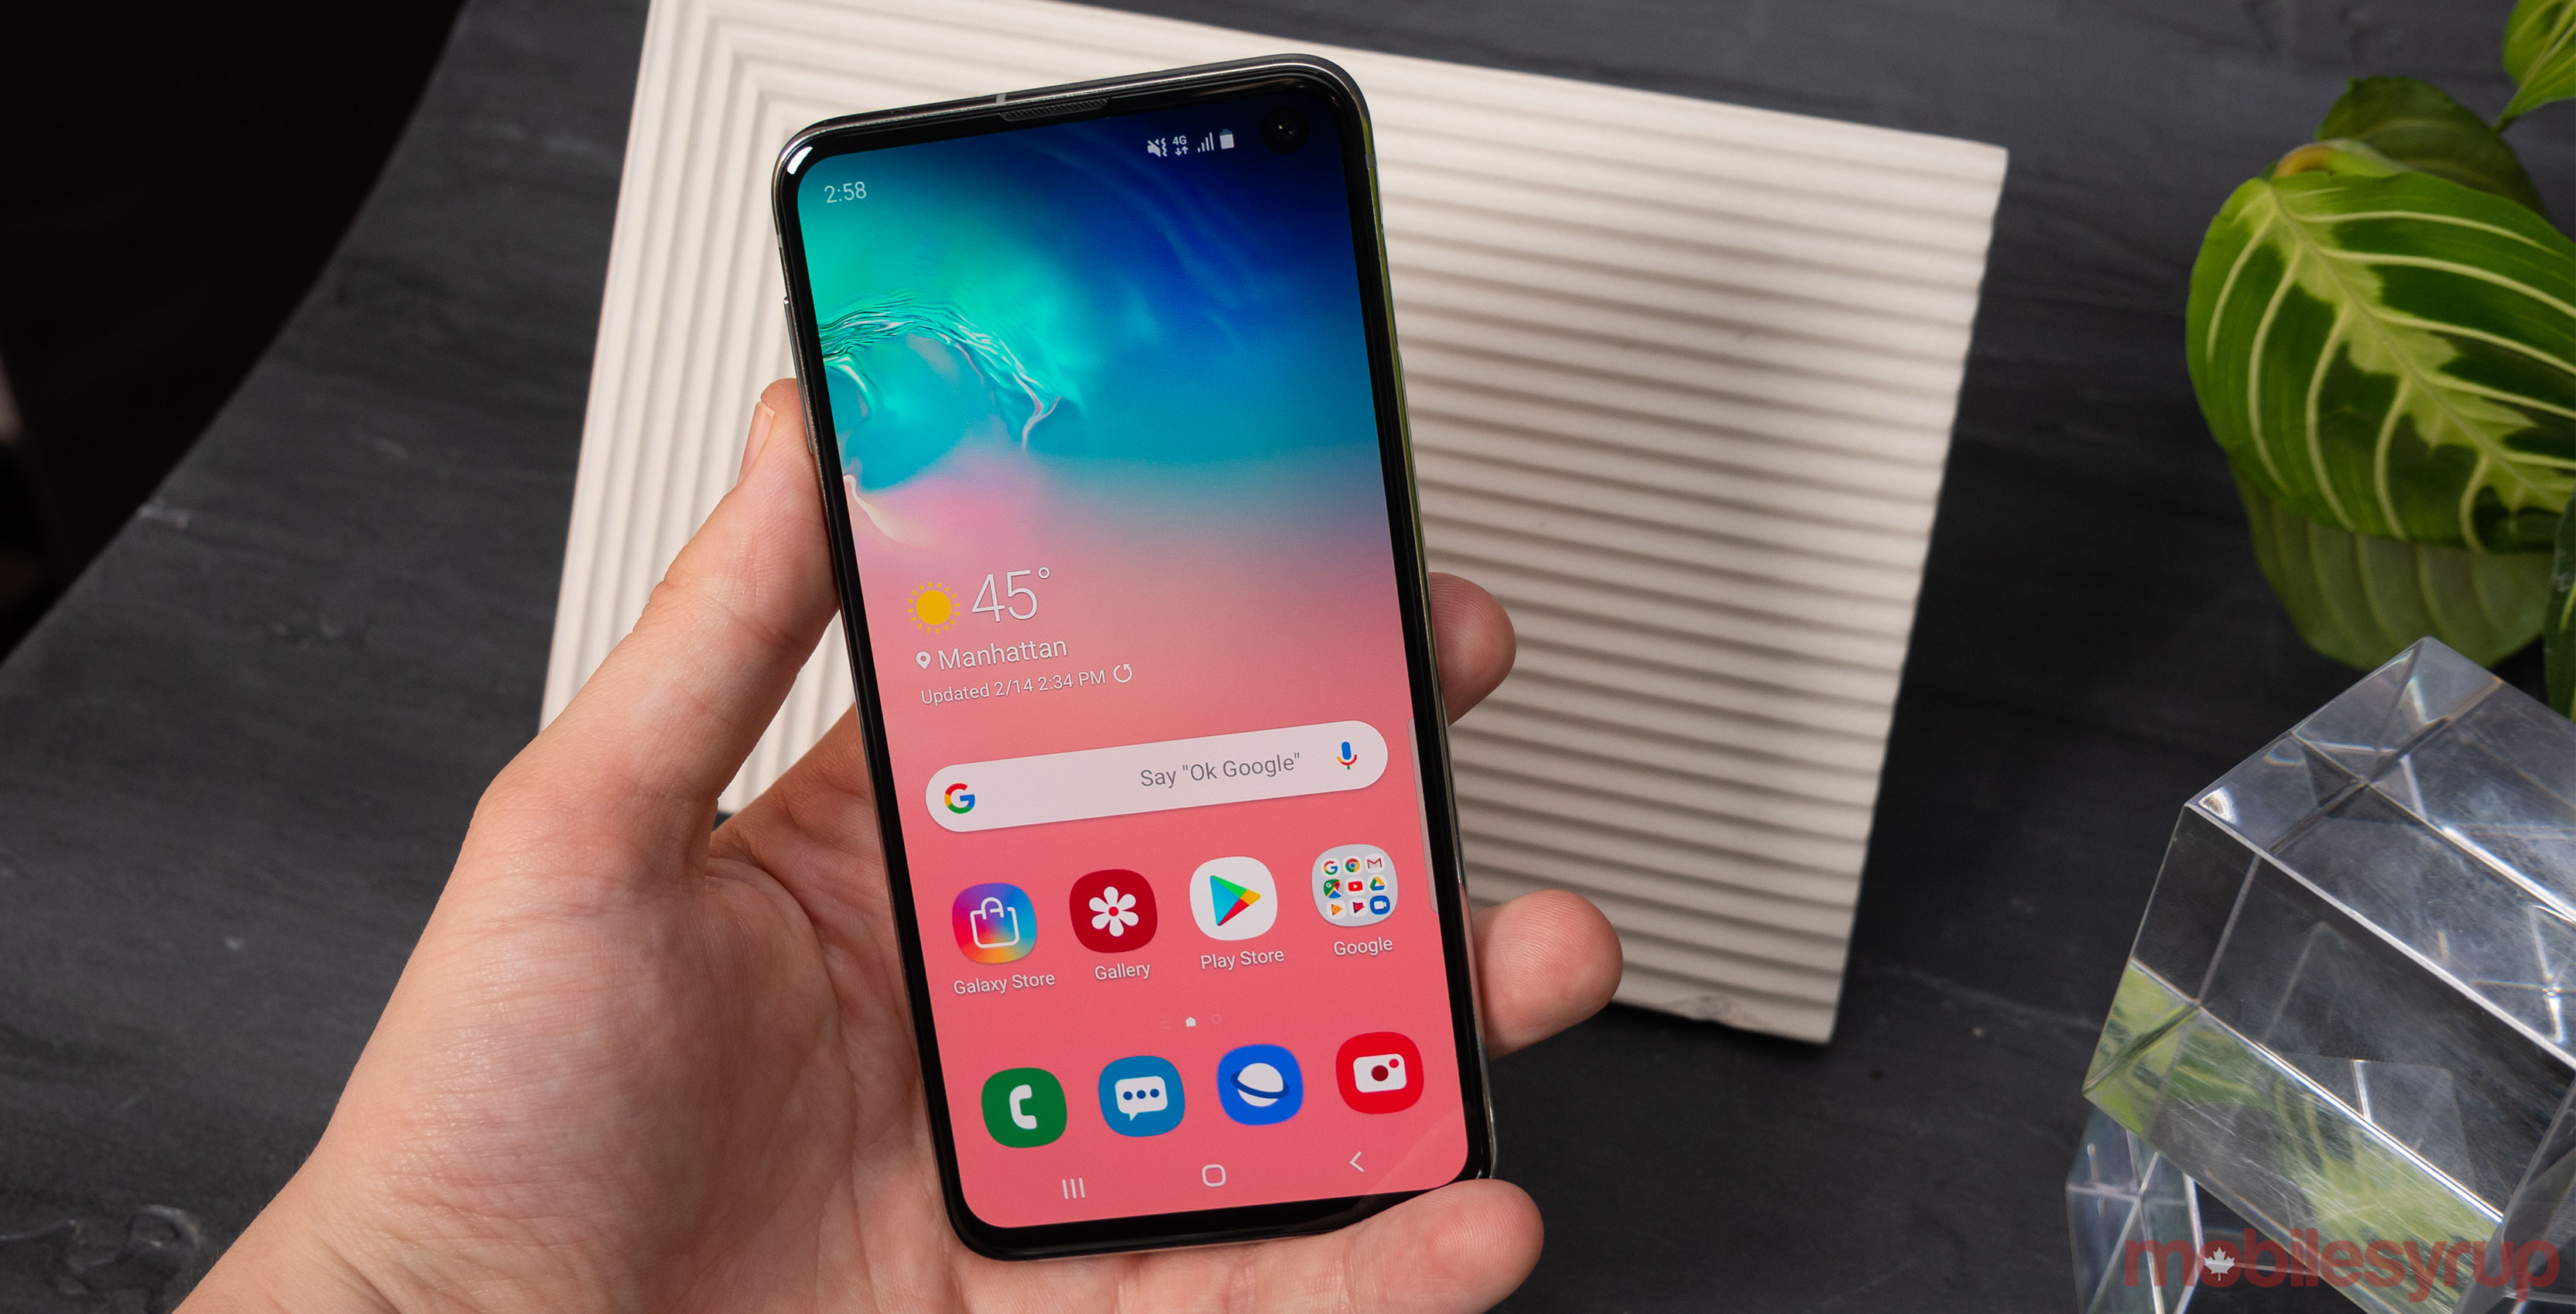 Samsung Galaxy S10 wallpapers are now available to download